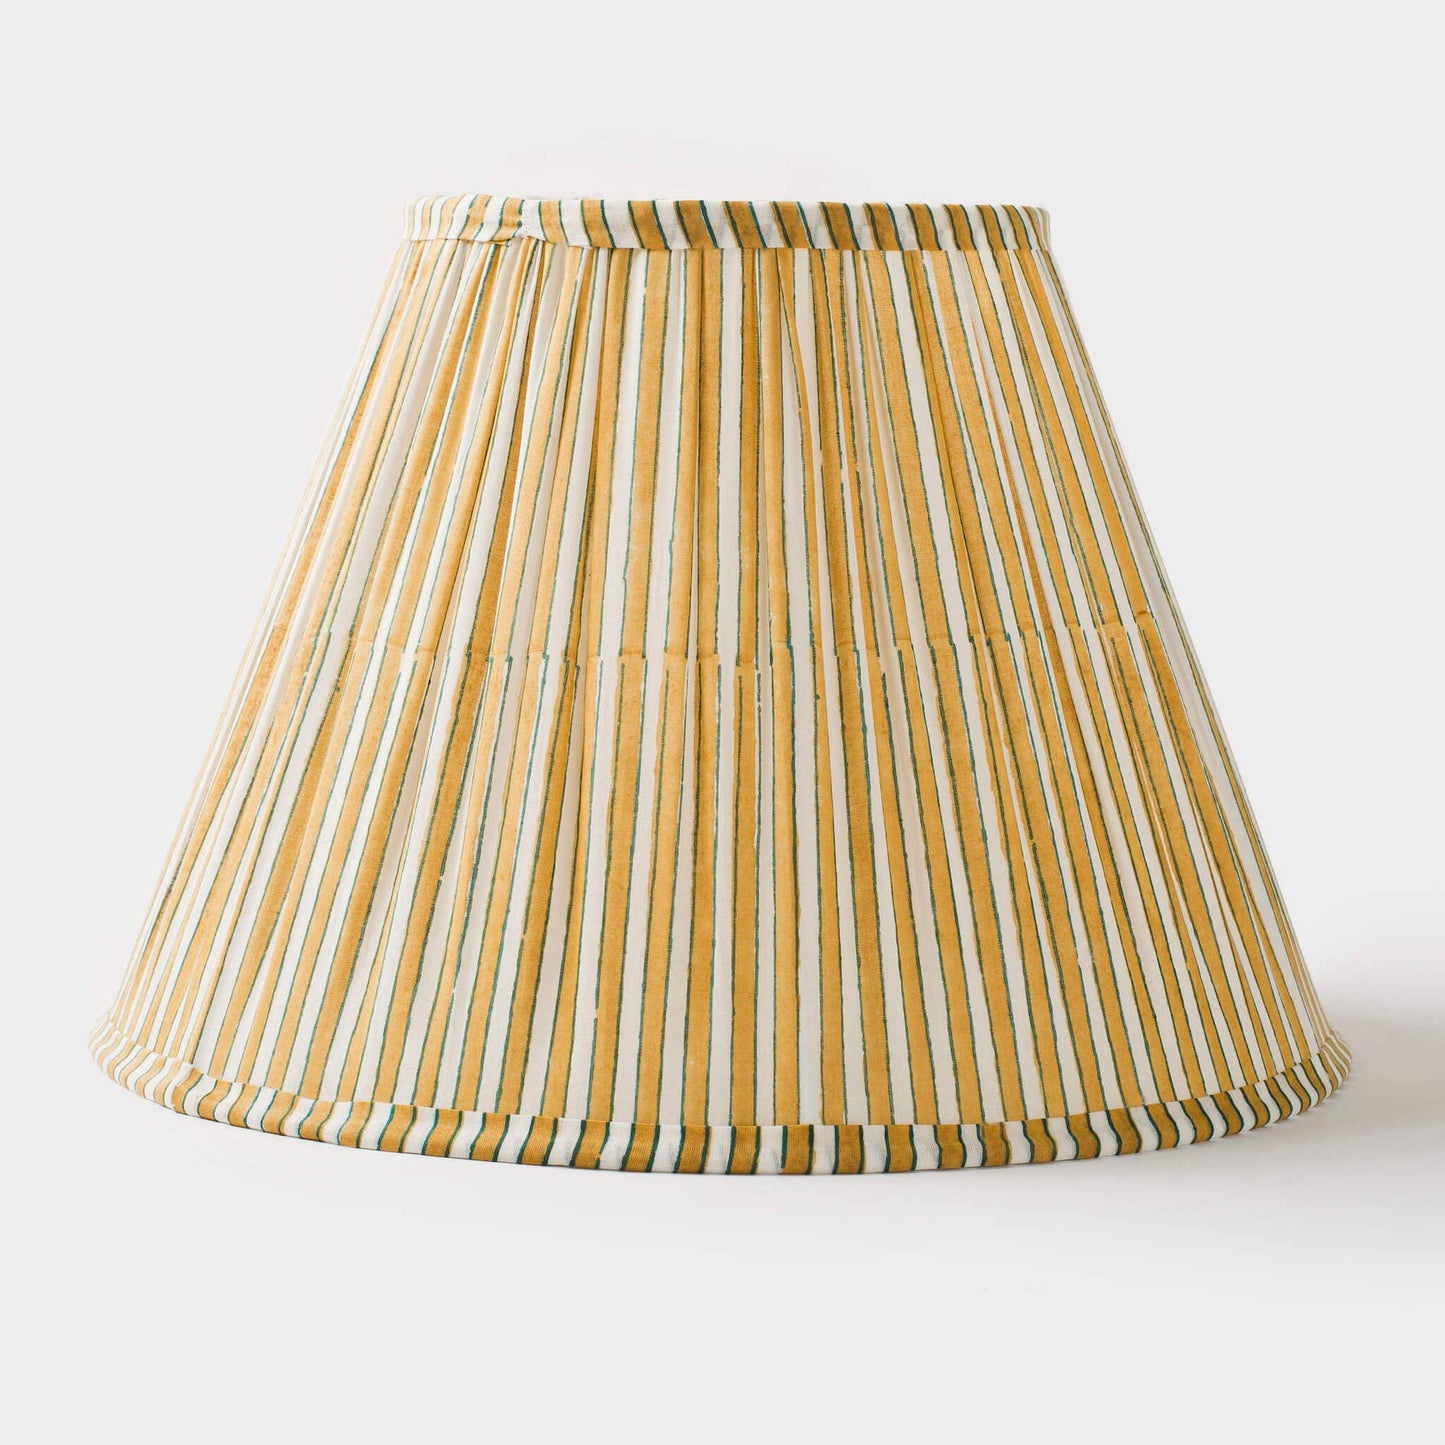 Candy Stripe Gathered Lampshade